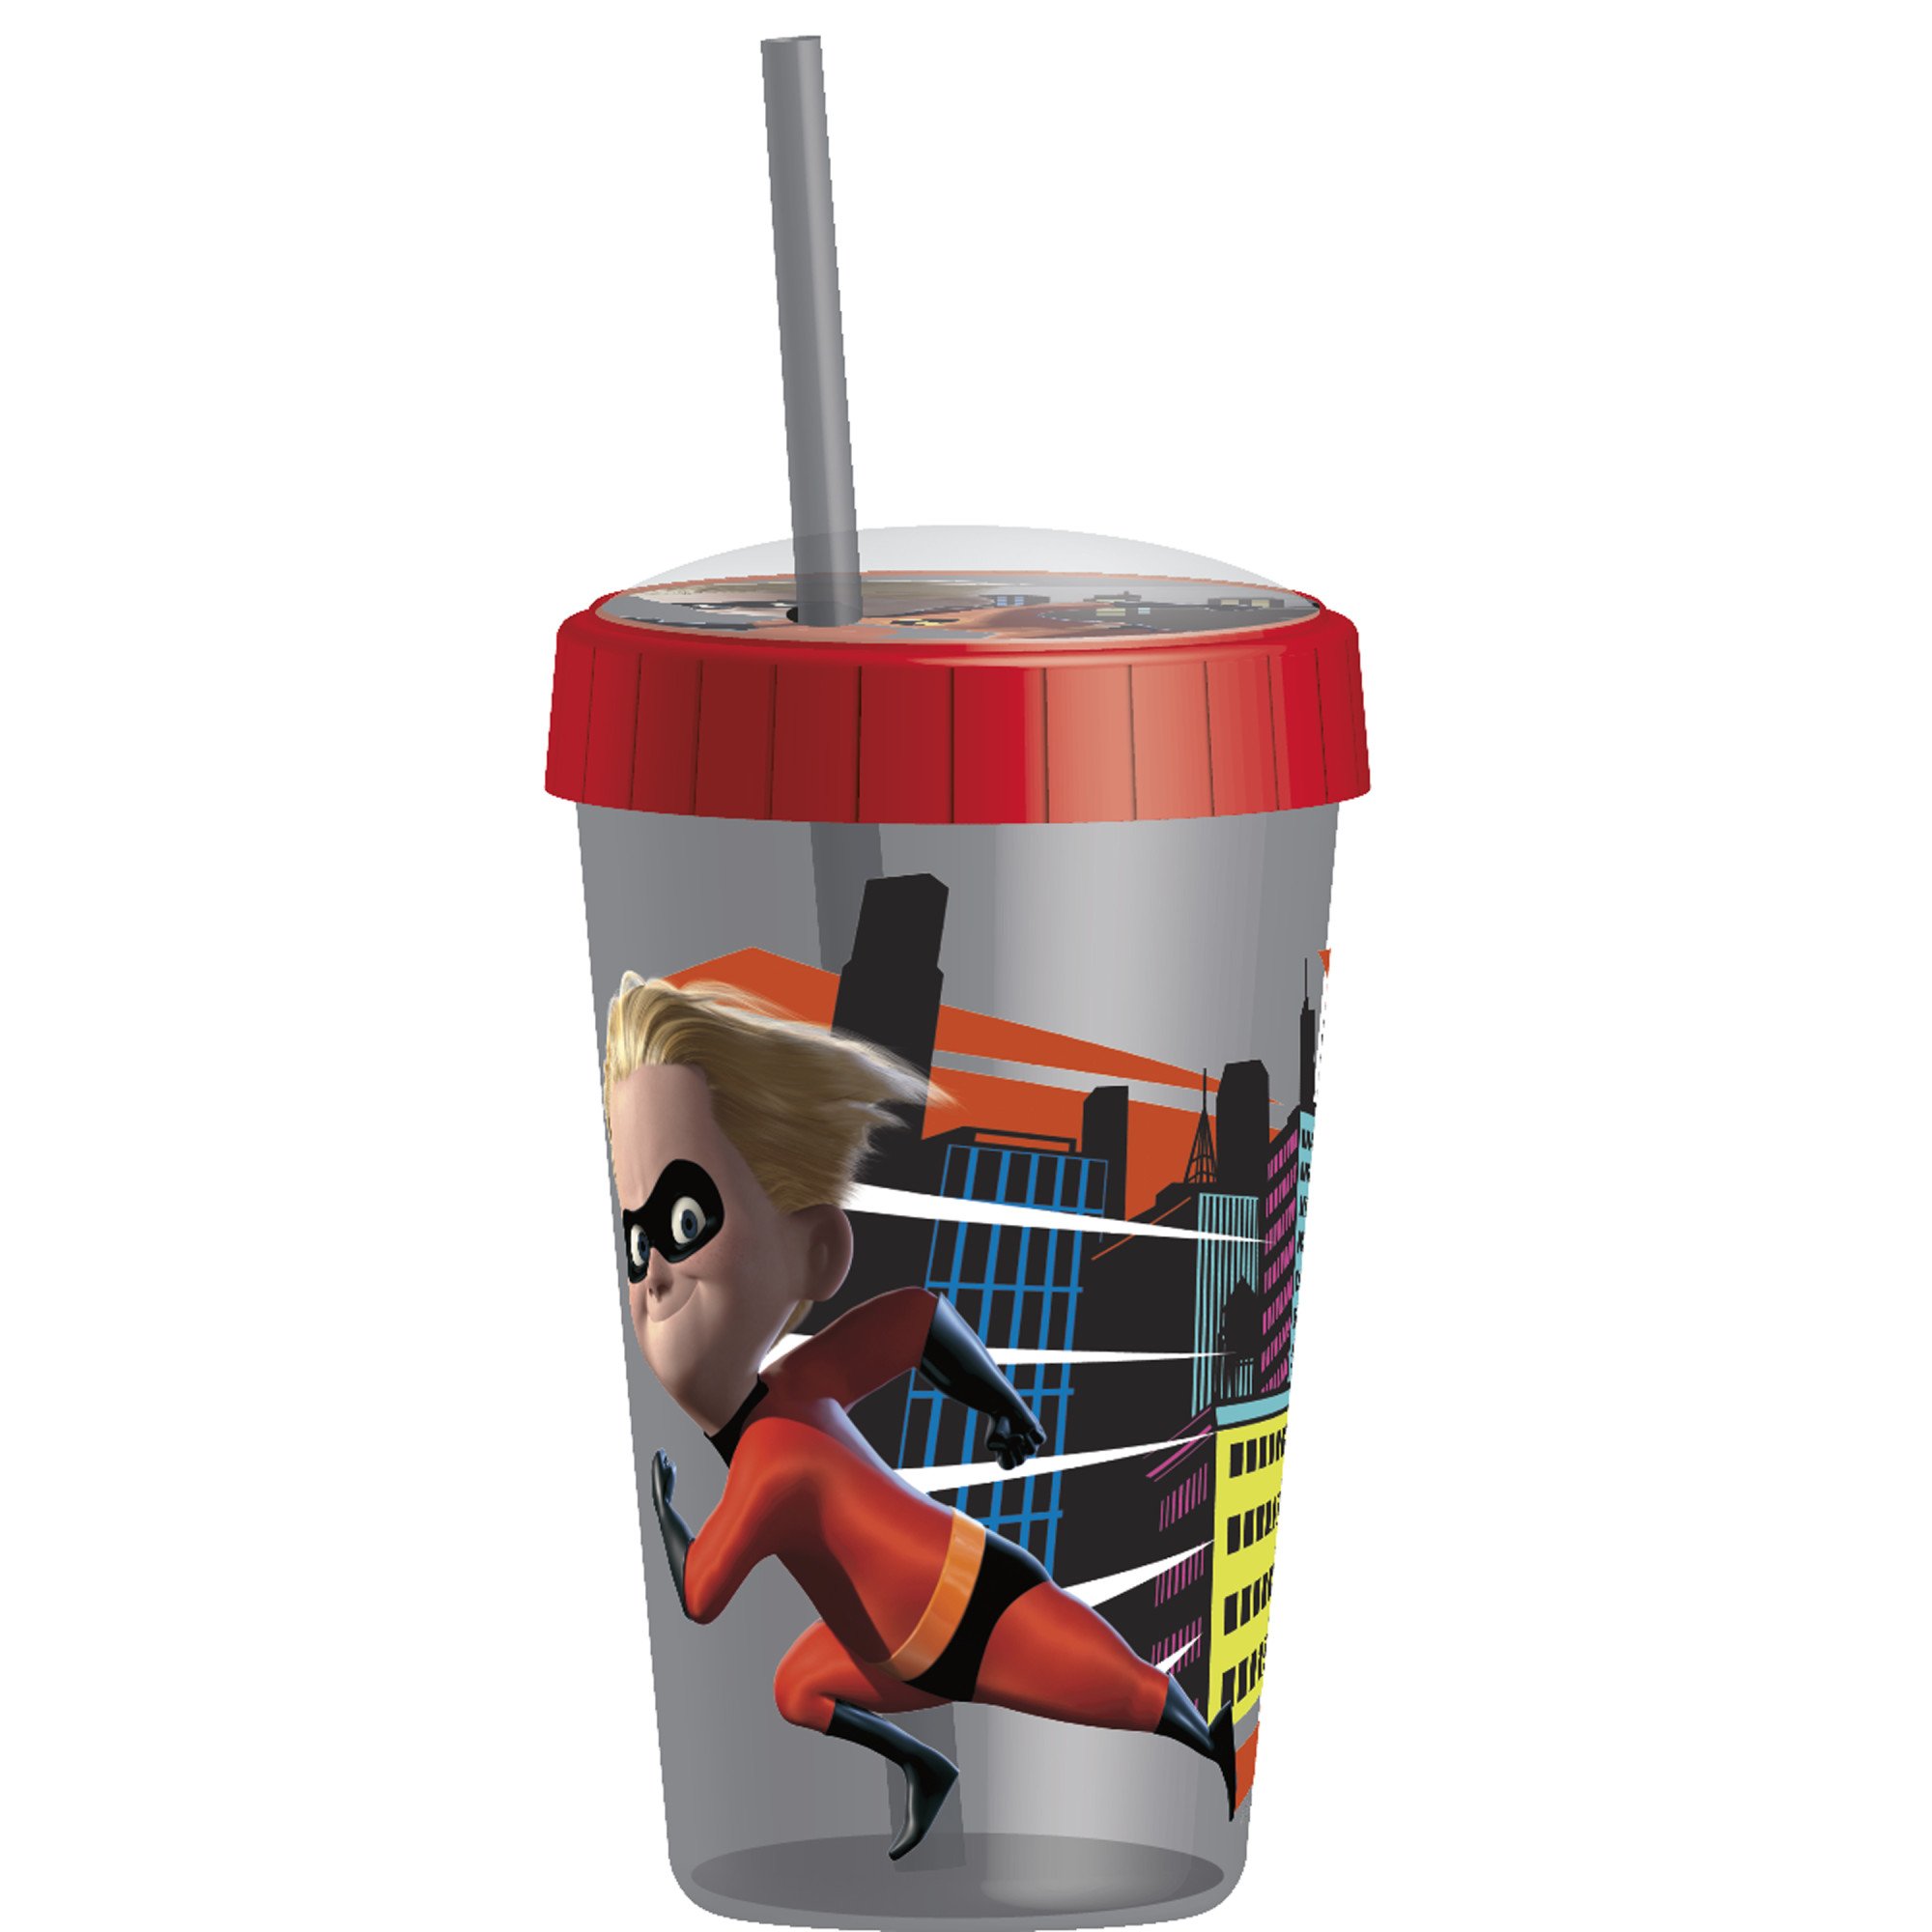 Book Cover Zak Designs 16.5oz Incredibles 2 Tumbler With Embossed Lid And Durable Straw - Artwork In Domed Lid Makes Characters Pop Out; Splash-proof And Dishwasher Safe, Incredibles 2 Dash-Violet E Incredibles 2 Dash-Violet 16.5oz Embossed Top w/straw